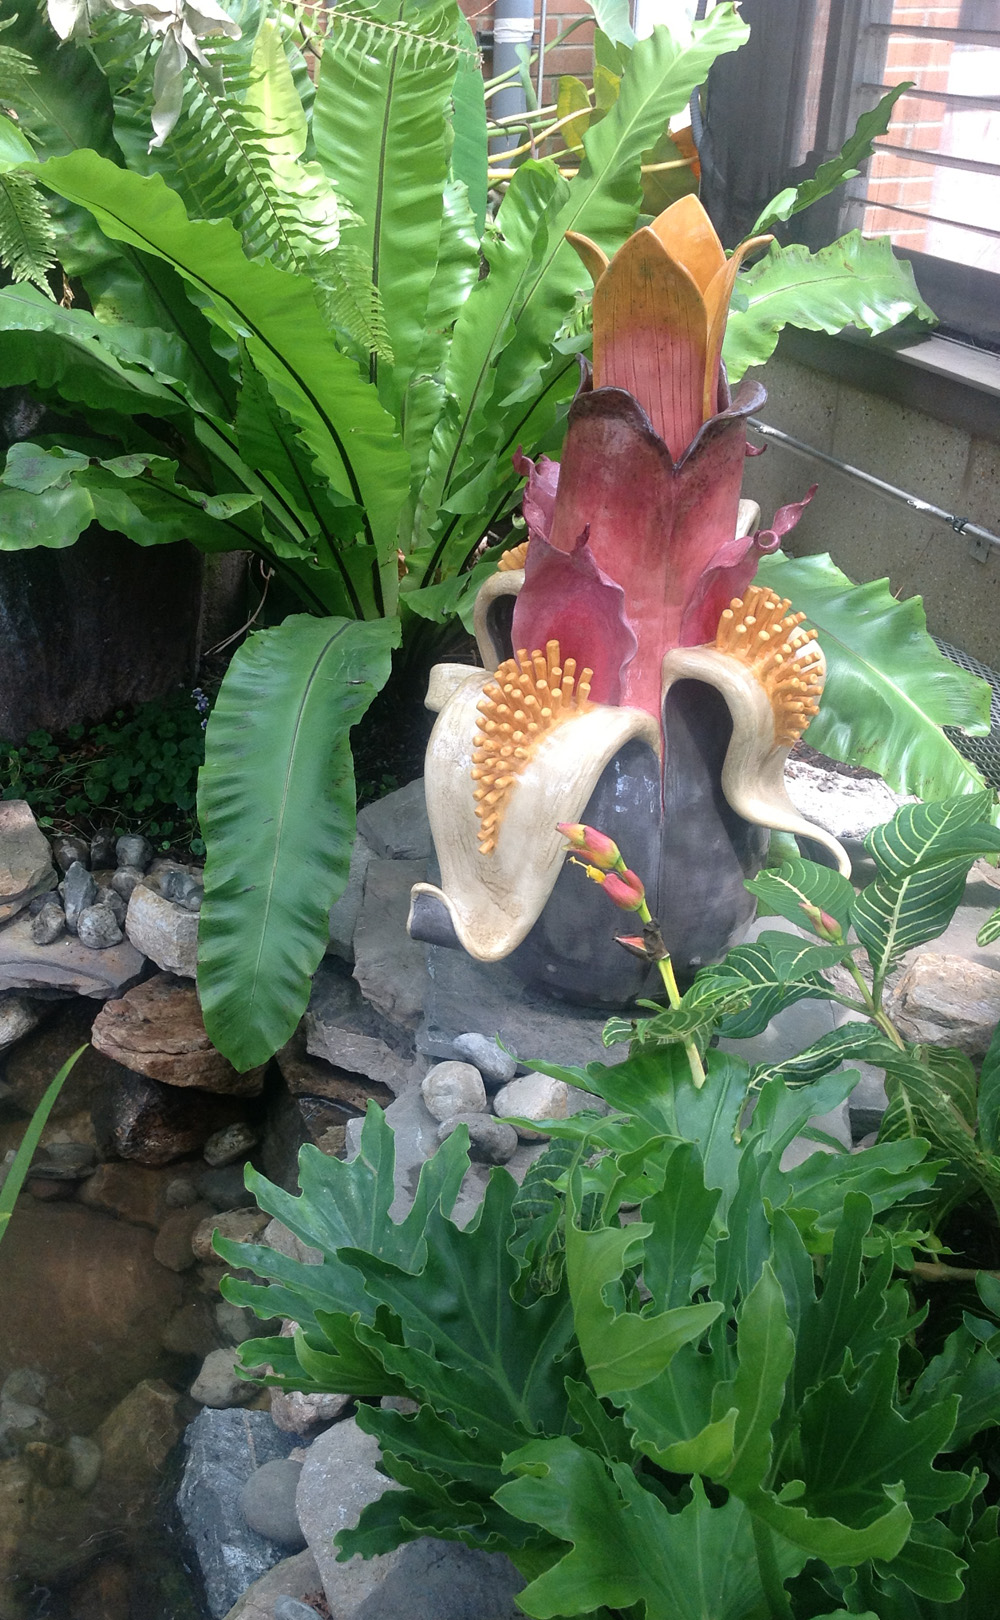 Picture of one of the sculptures on display at Orchid Conservatory "Fruitoids Invade" show